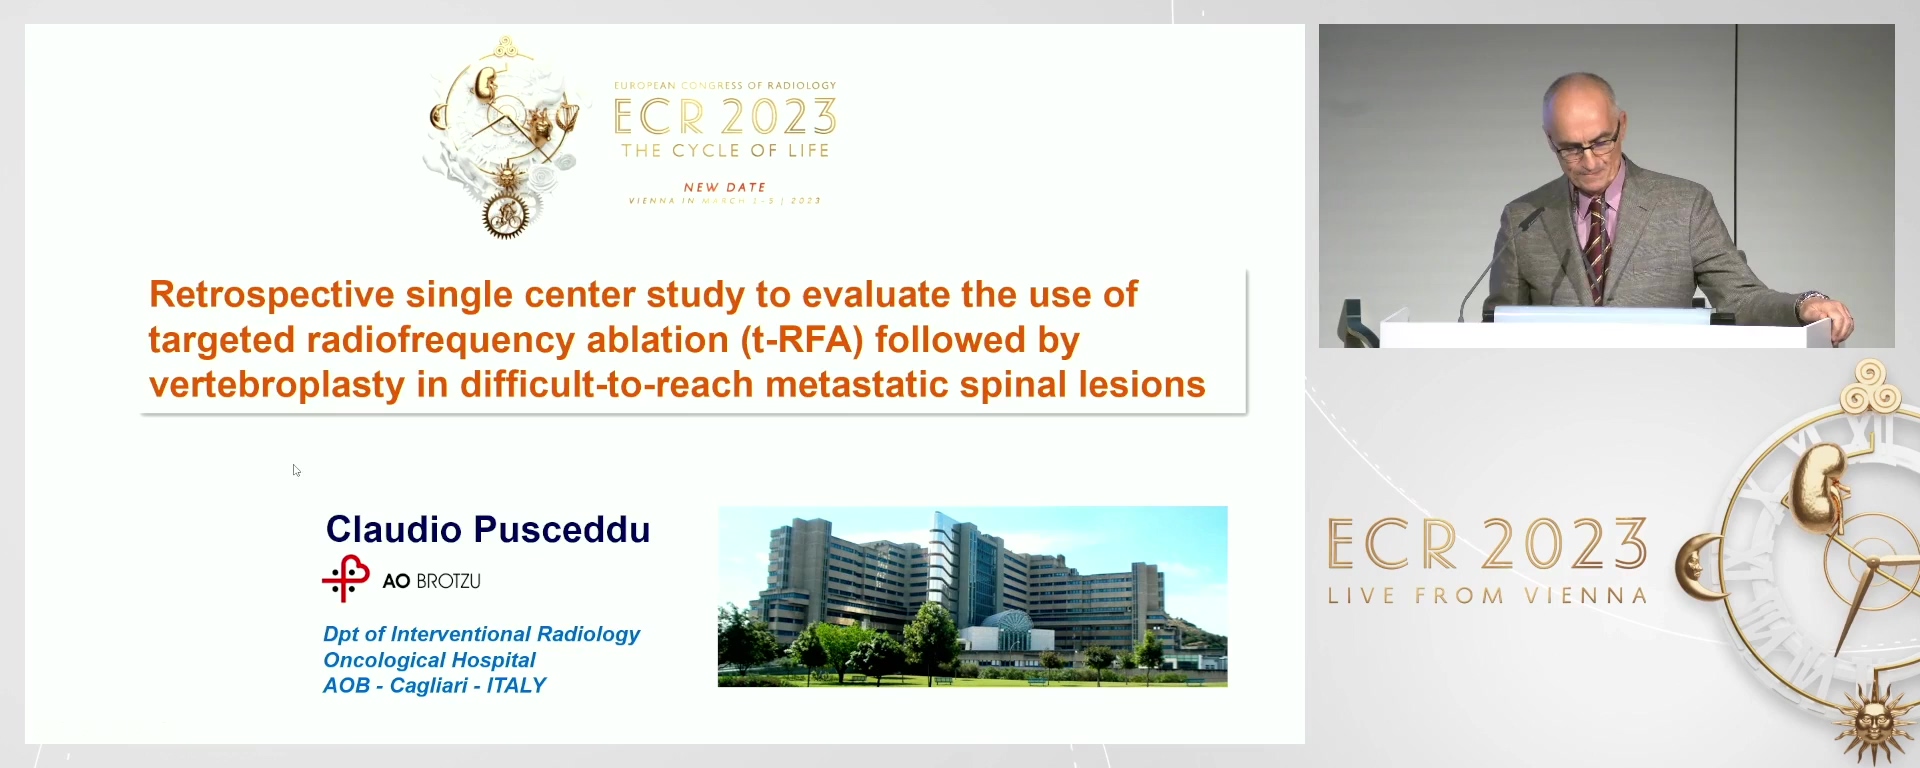 Retrospective single-centre study to evaluate the use of targeted radiofrequency ablation (t-RFA) followed by vertebroplasty in difficult-to-reach metastatic spinal lesions